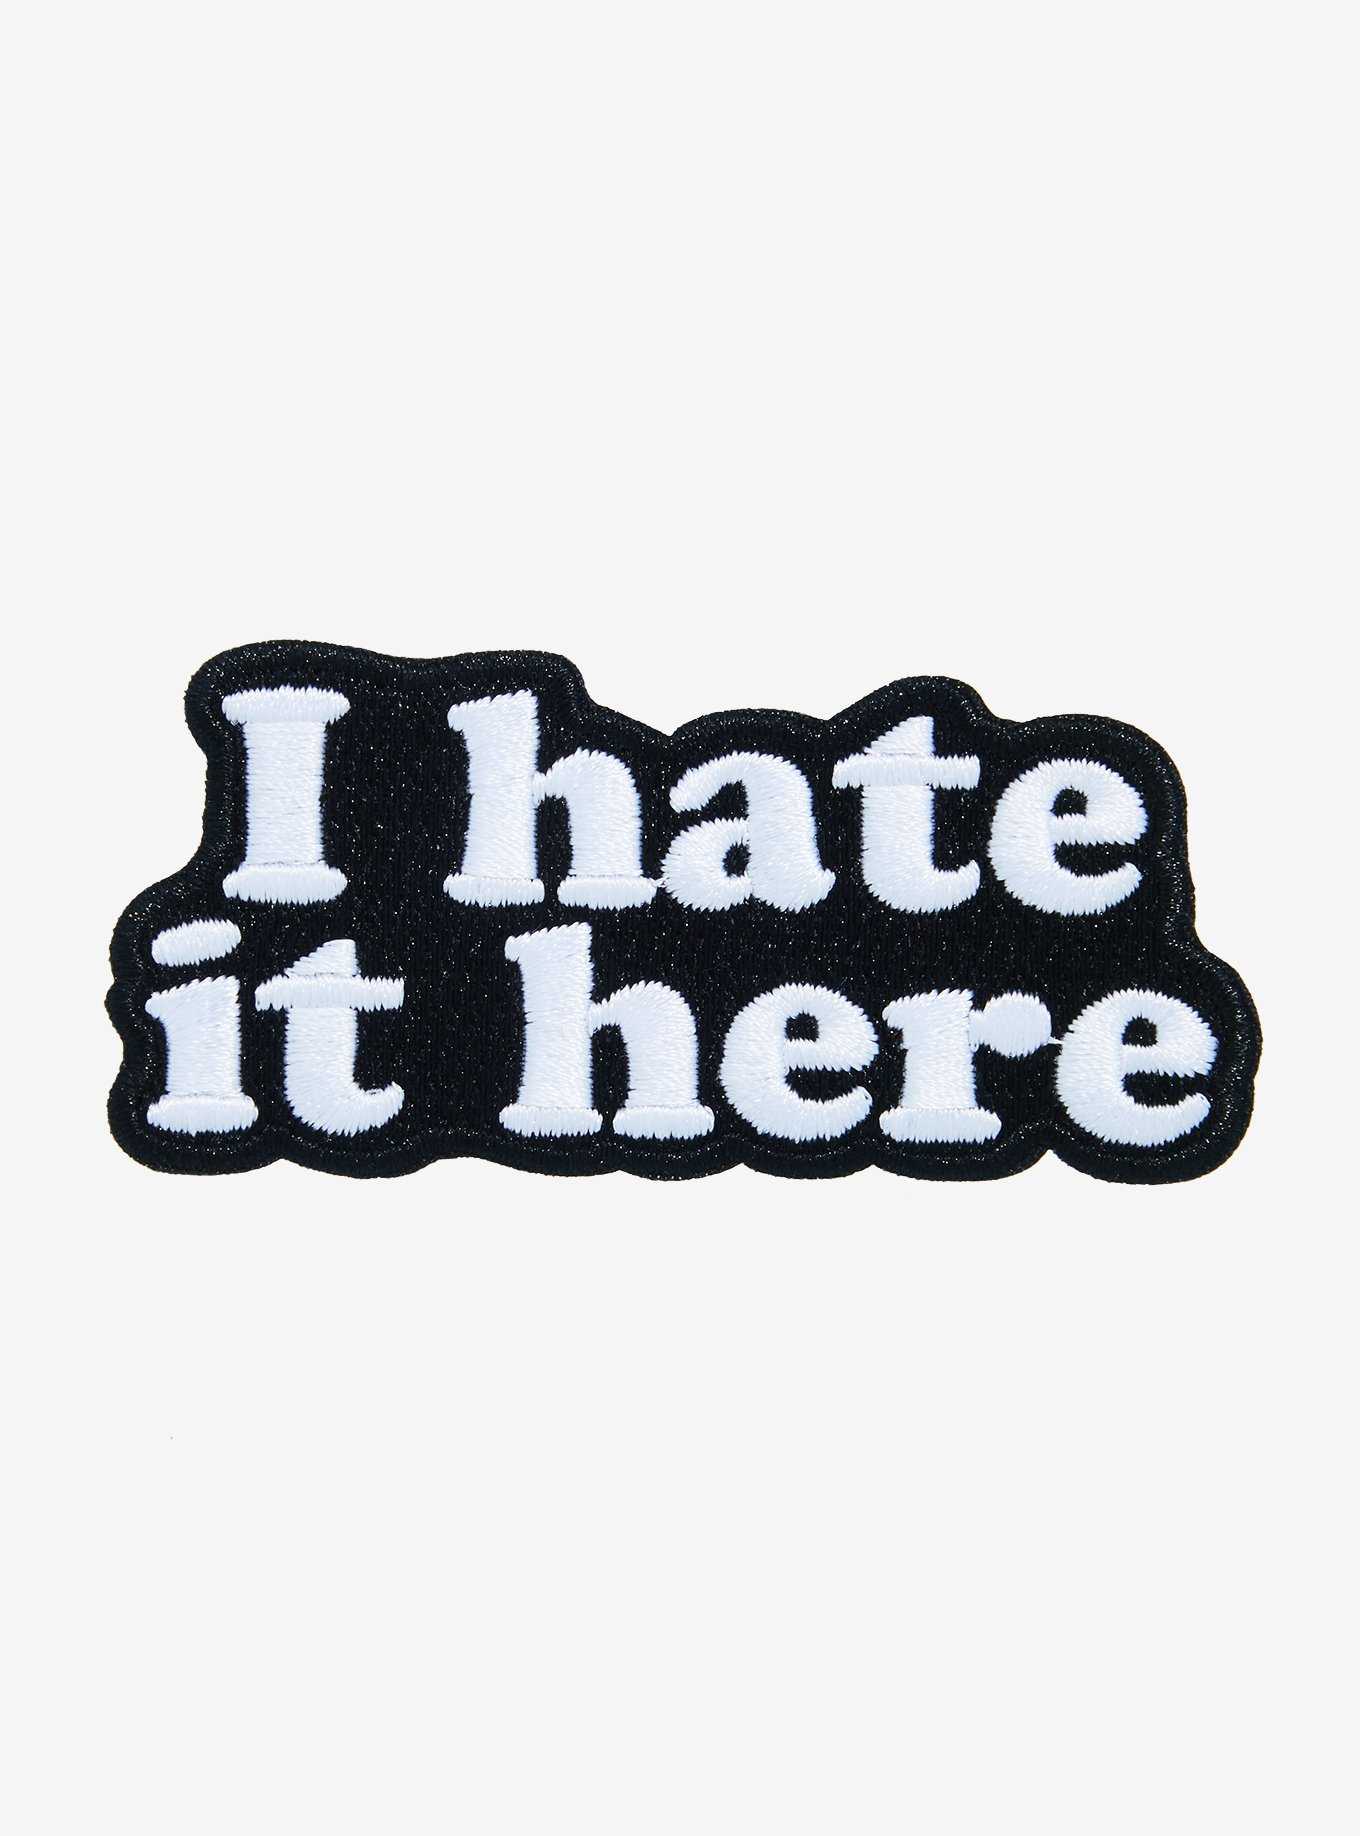 I Hate It Here Patch, , hi-res